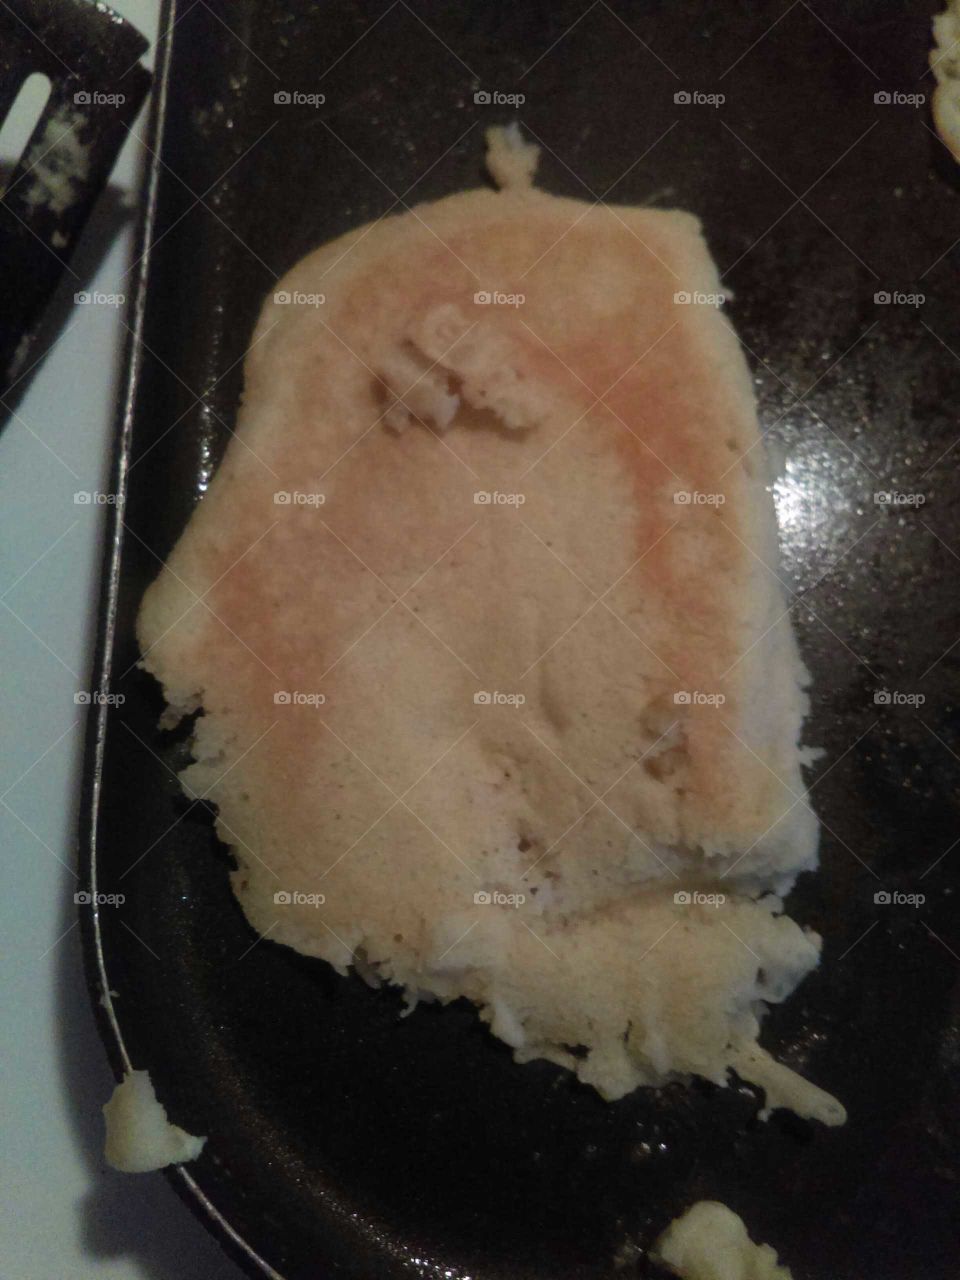 my pancake looks like a face of a man